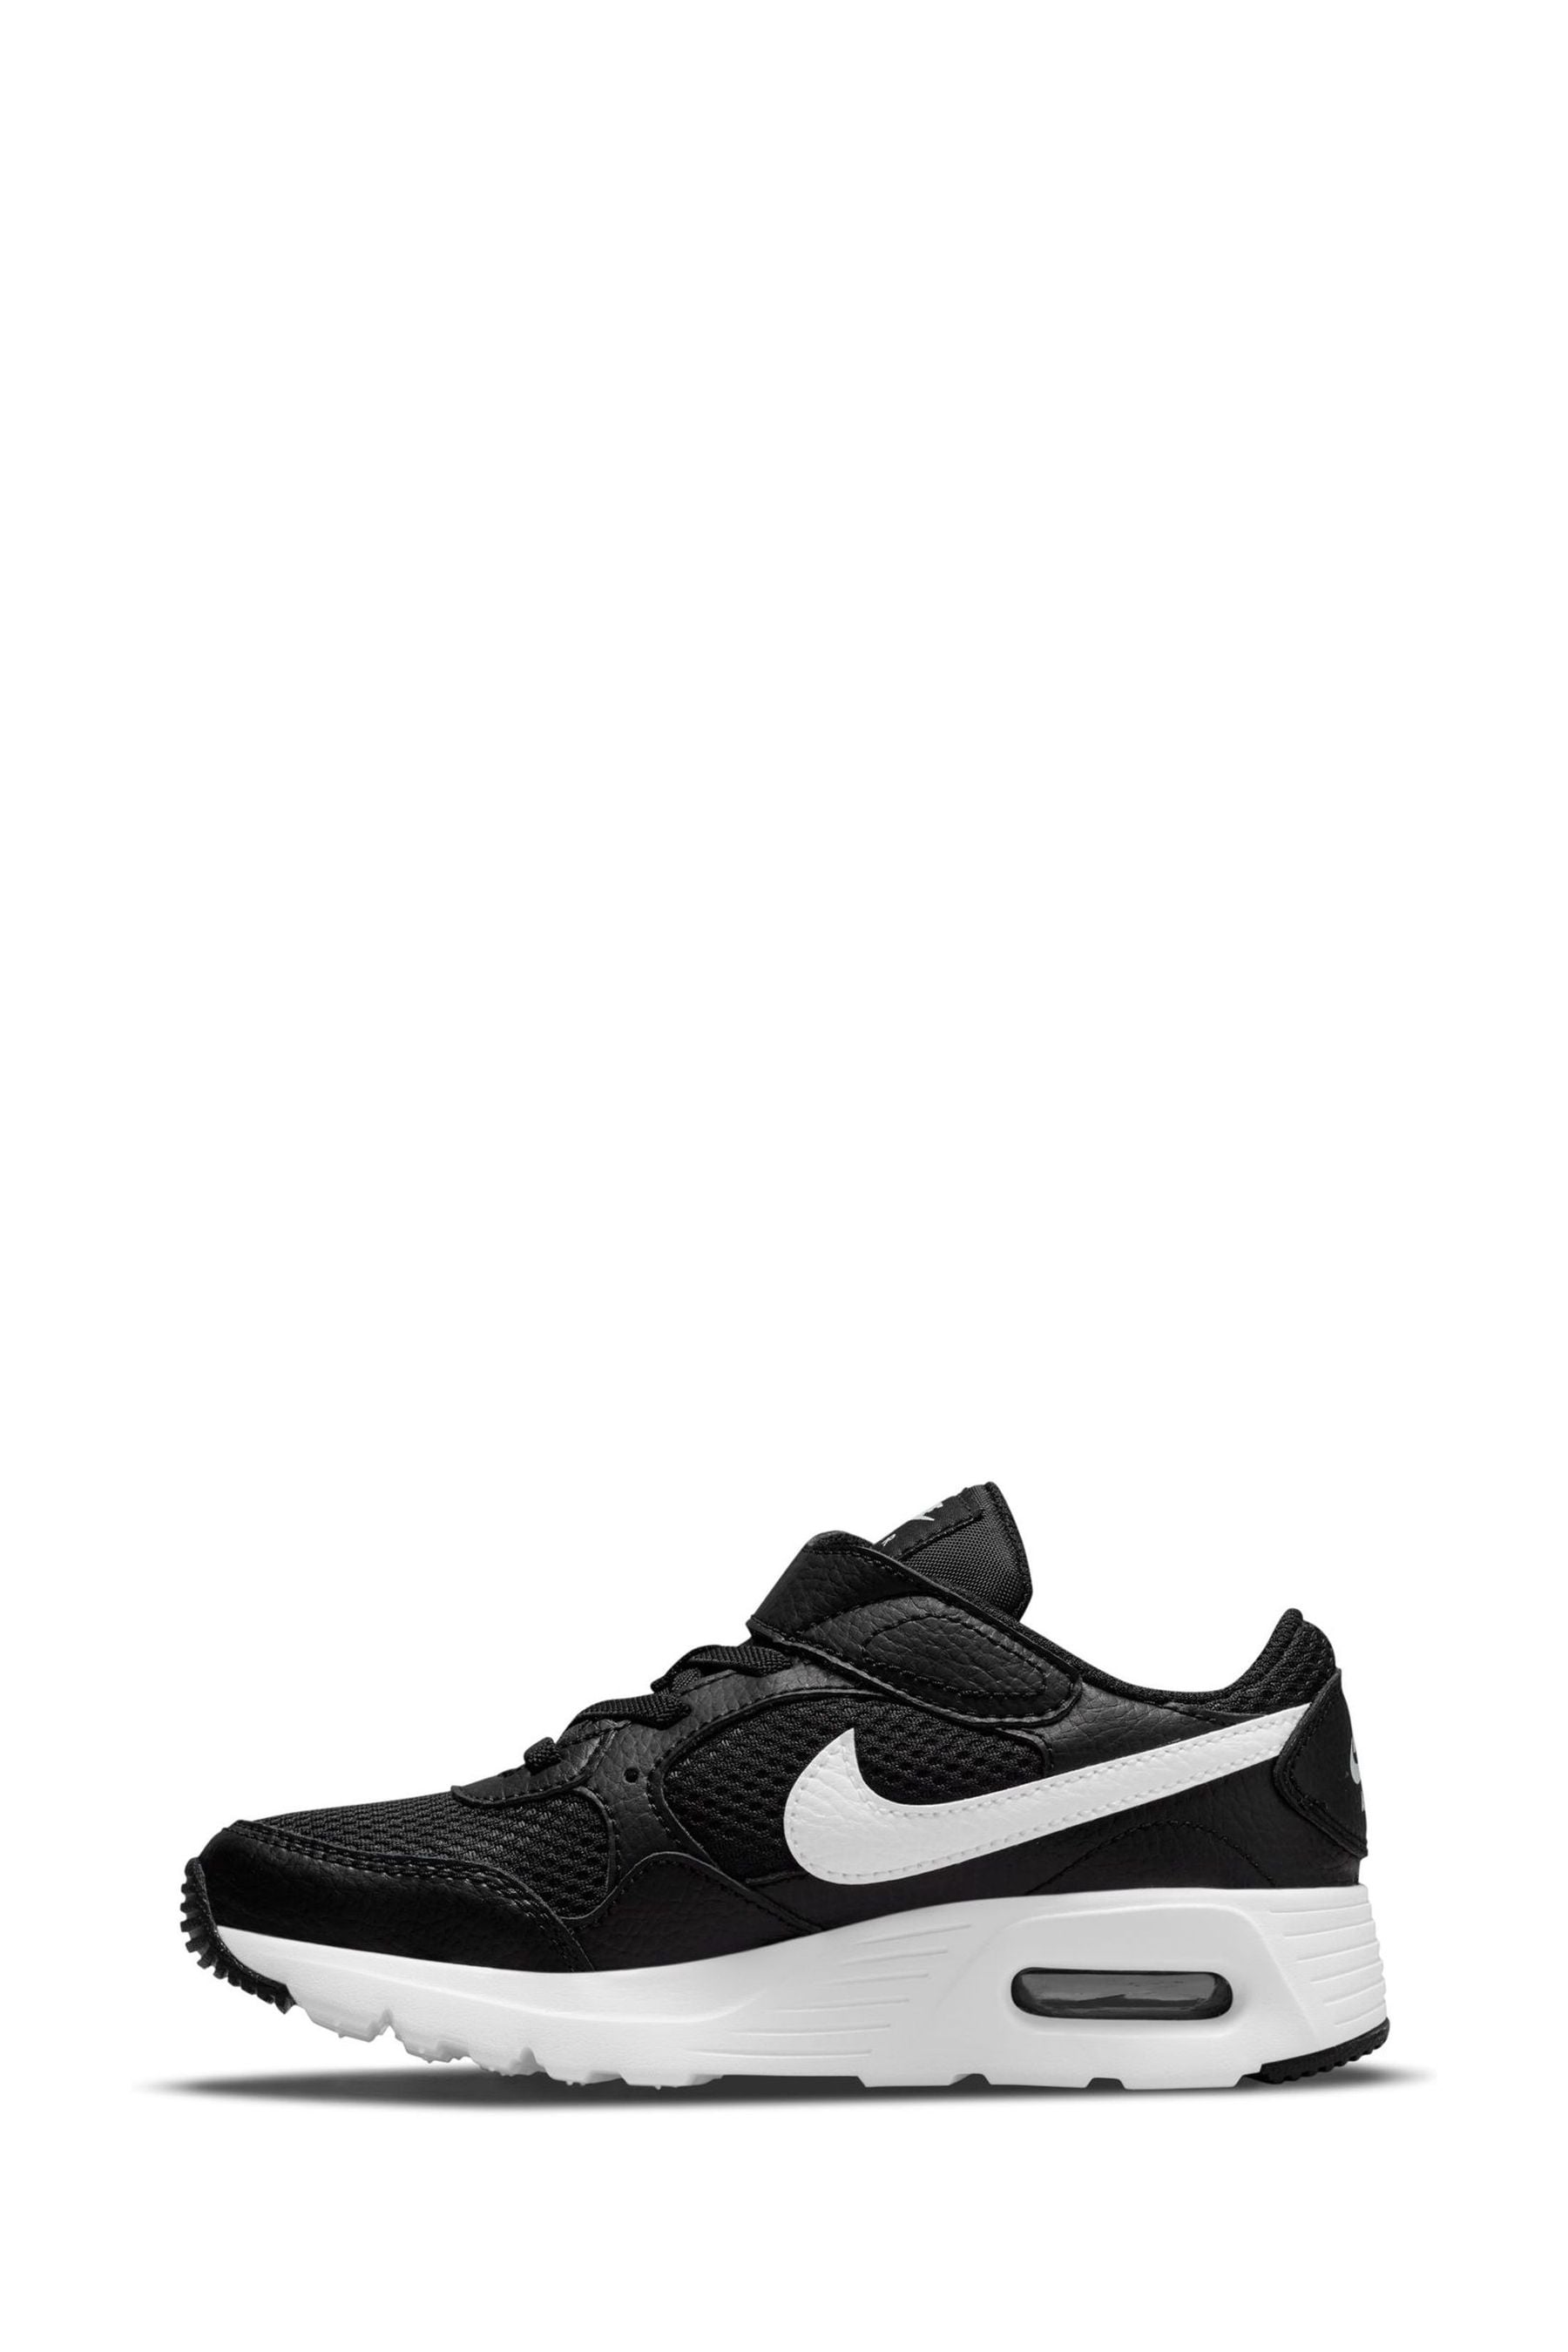 Buy Nike Black/White Junior Air Max SC Trainers from the Next UK online ...